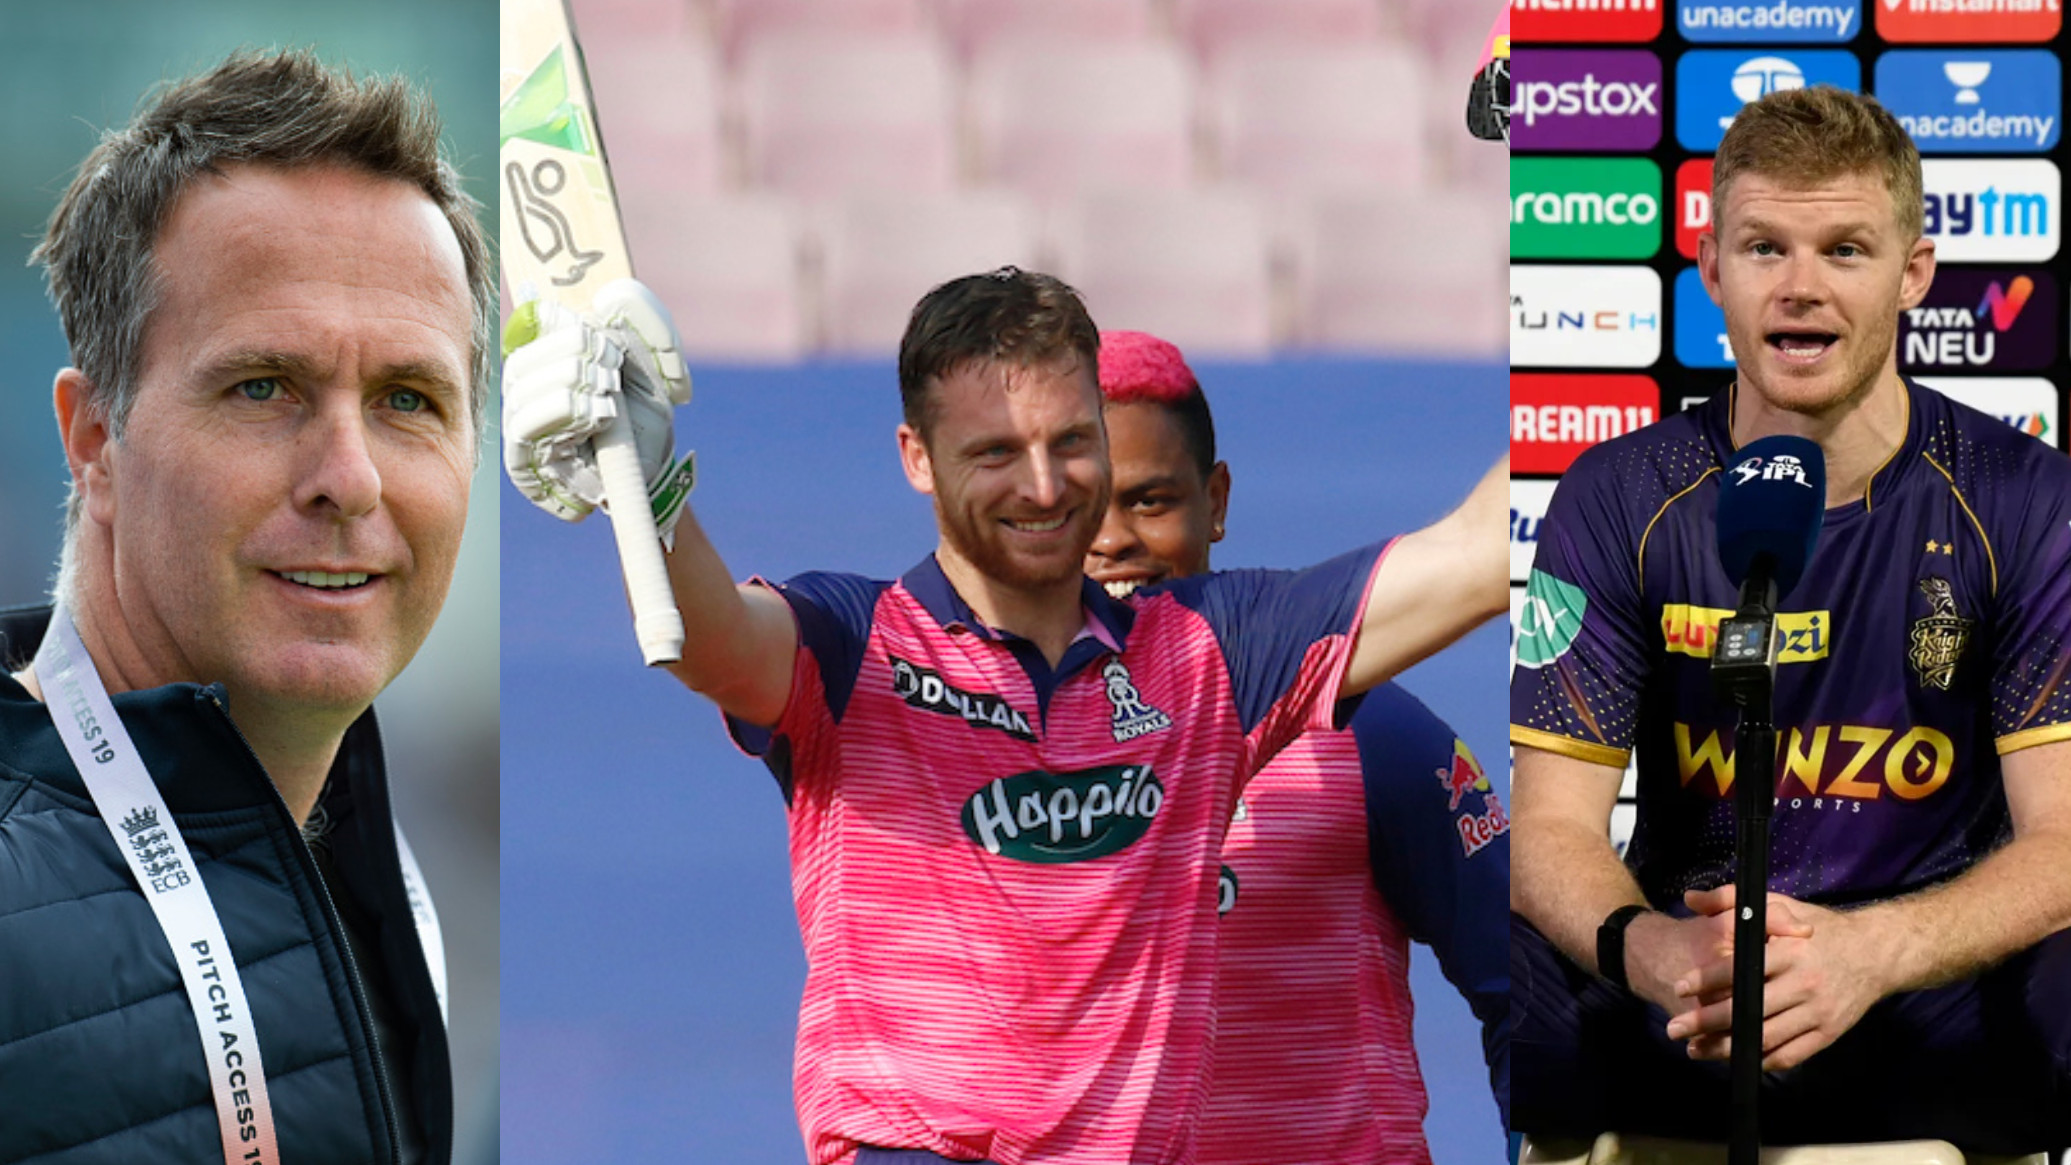 IPL 2022: Cricket fraternity astonished as Jos Buttler’s 100, Shimron Hetmyer’s onslaught takes RR to 193/8